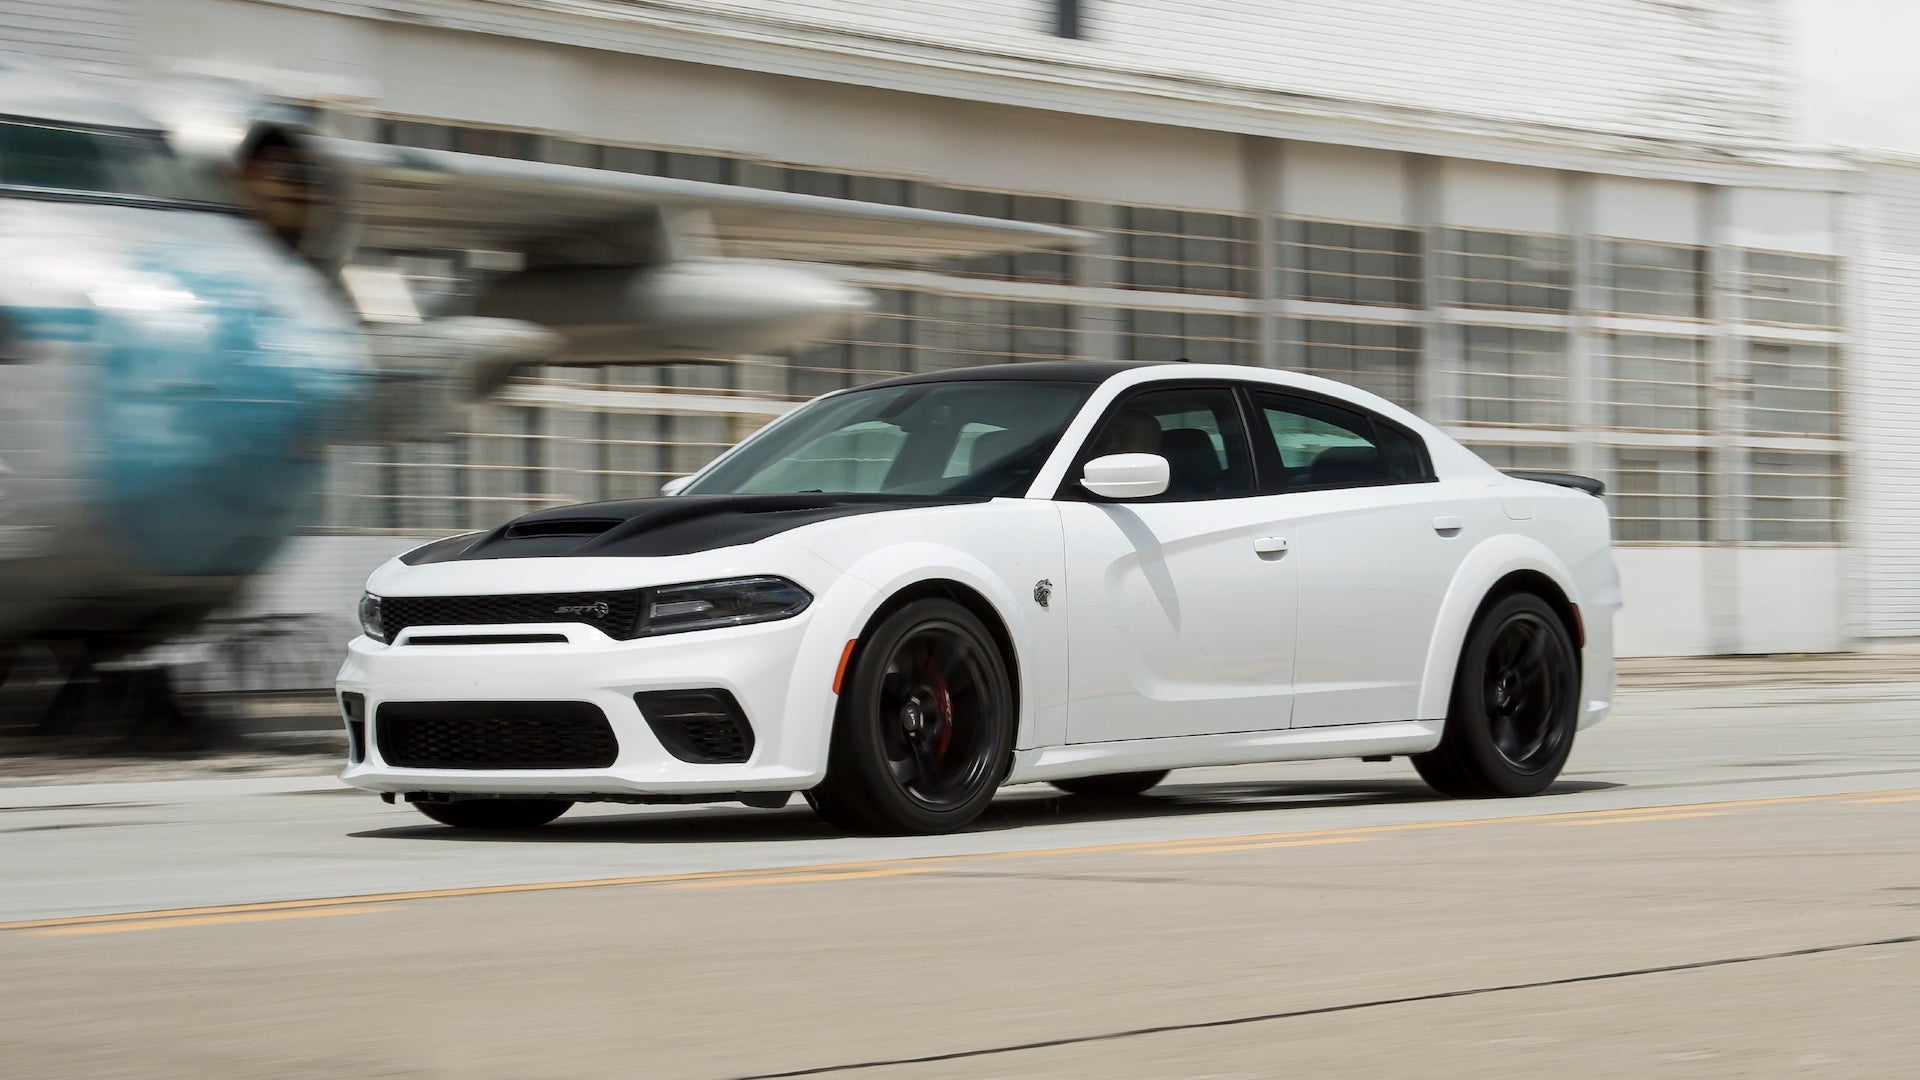 The 2021 Dodge Charger Hellcat Redeye Is the Most Expensive Charger Ever Starting at $80,090